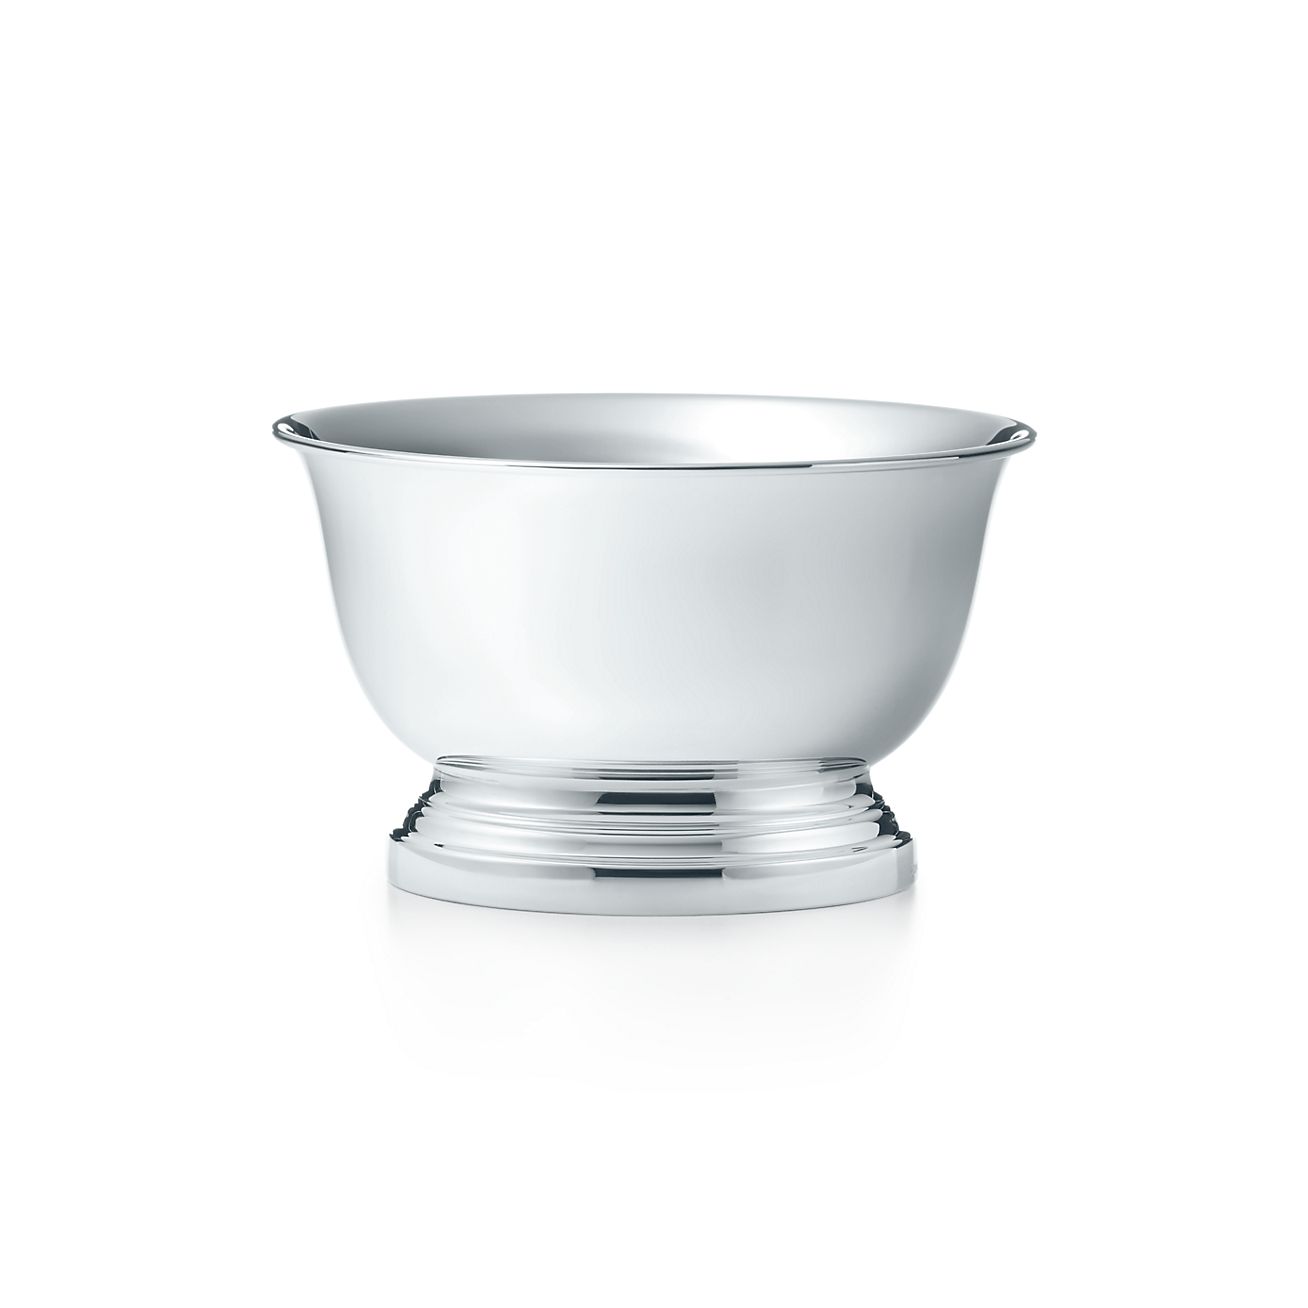 Dog bowl in sterling silver, small 